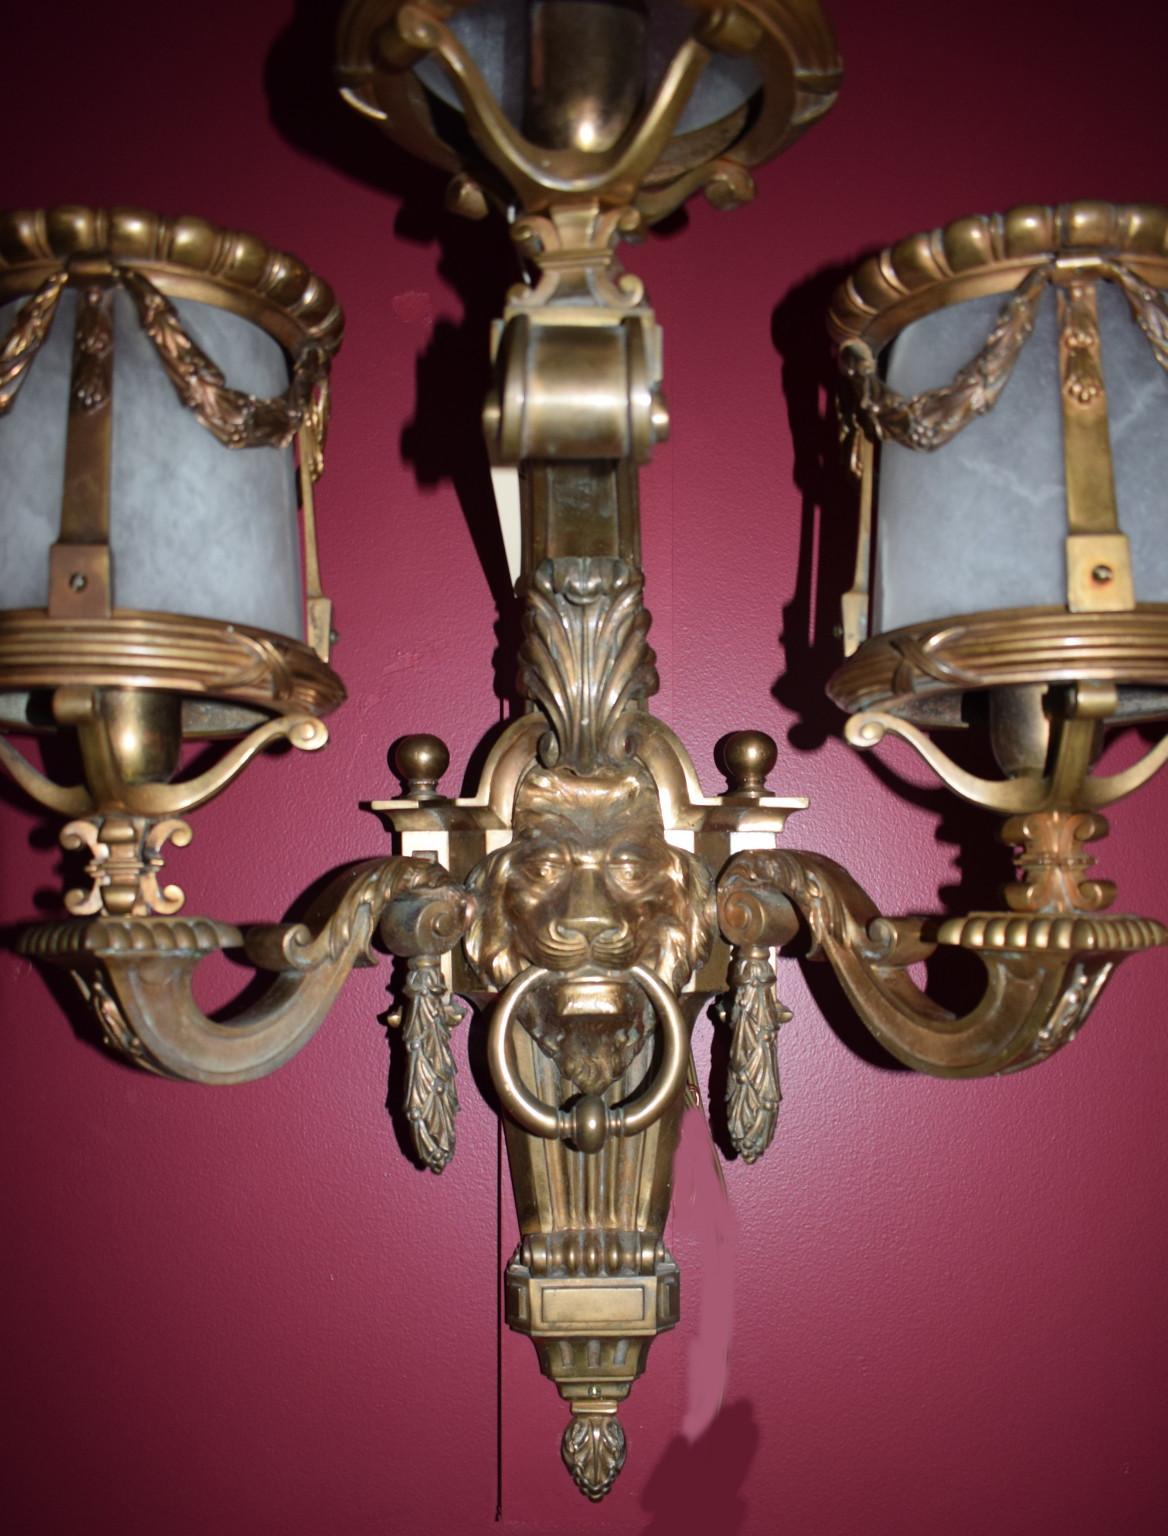 Very fine pair of three-light gilt bronze sconces in the Louis XIV style with alabaster shades.